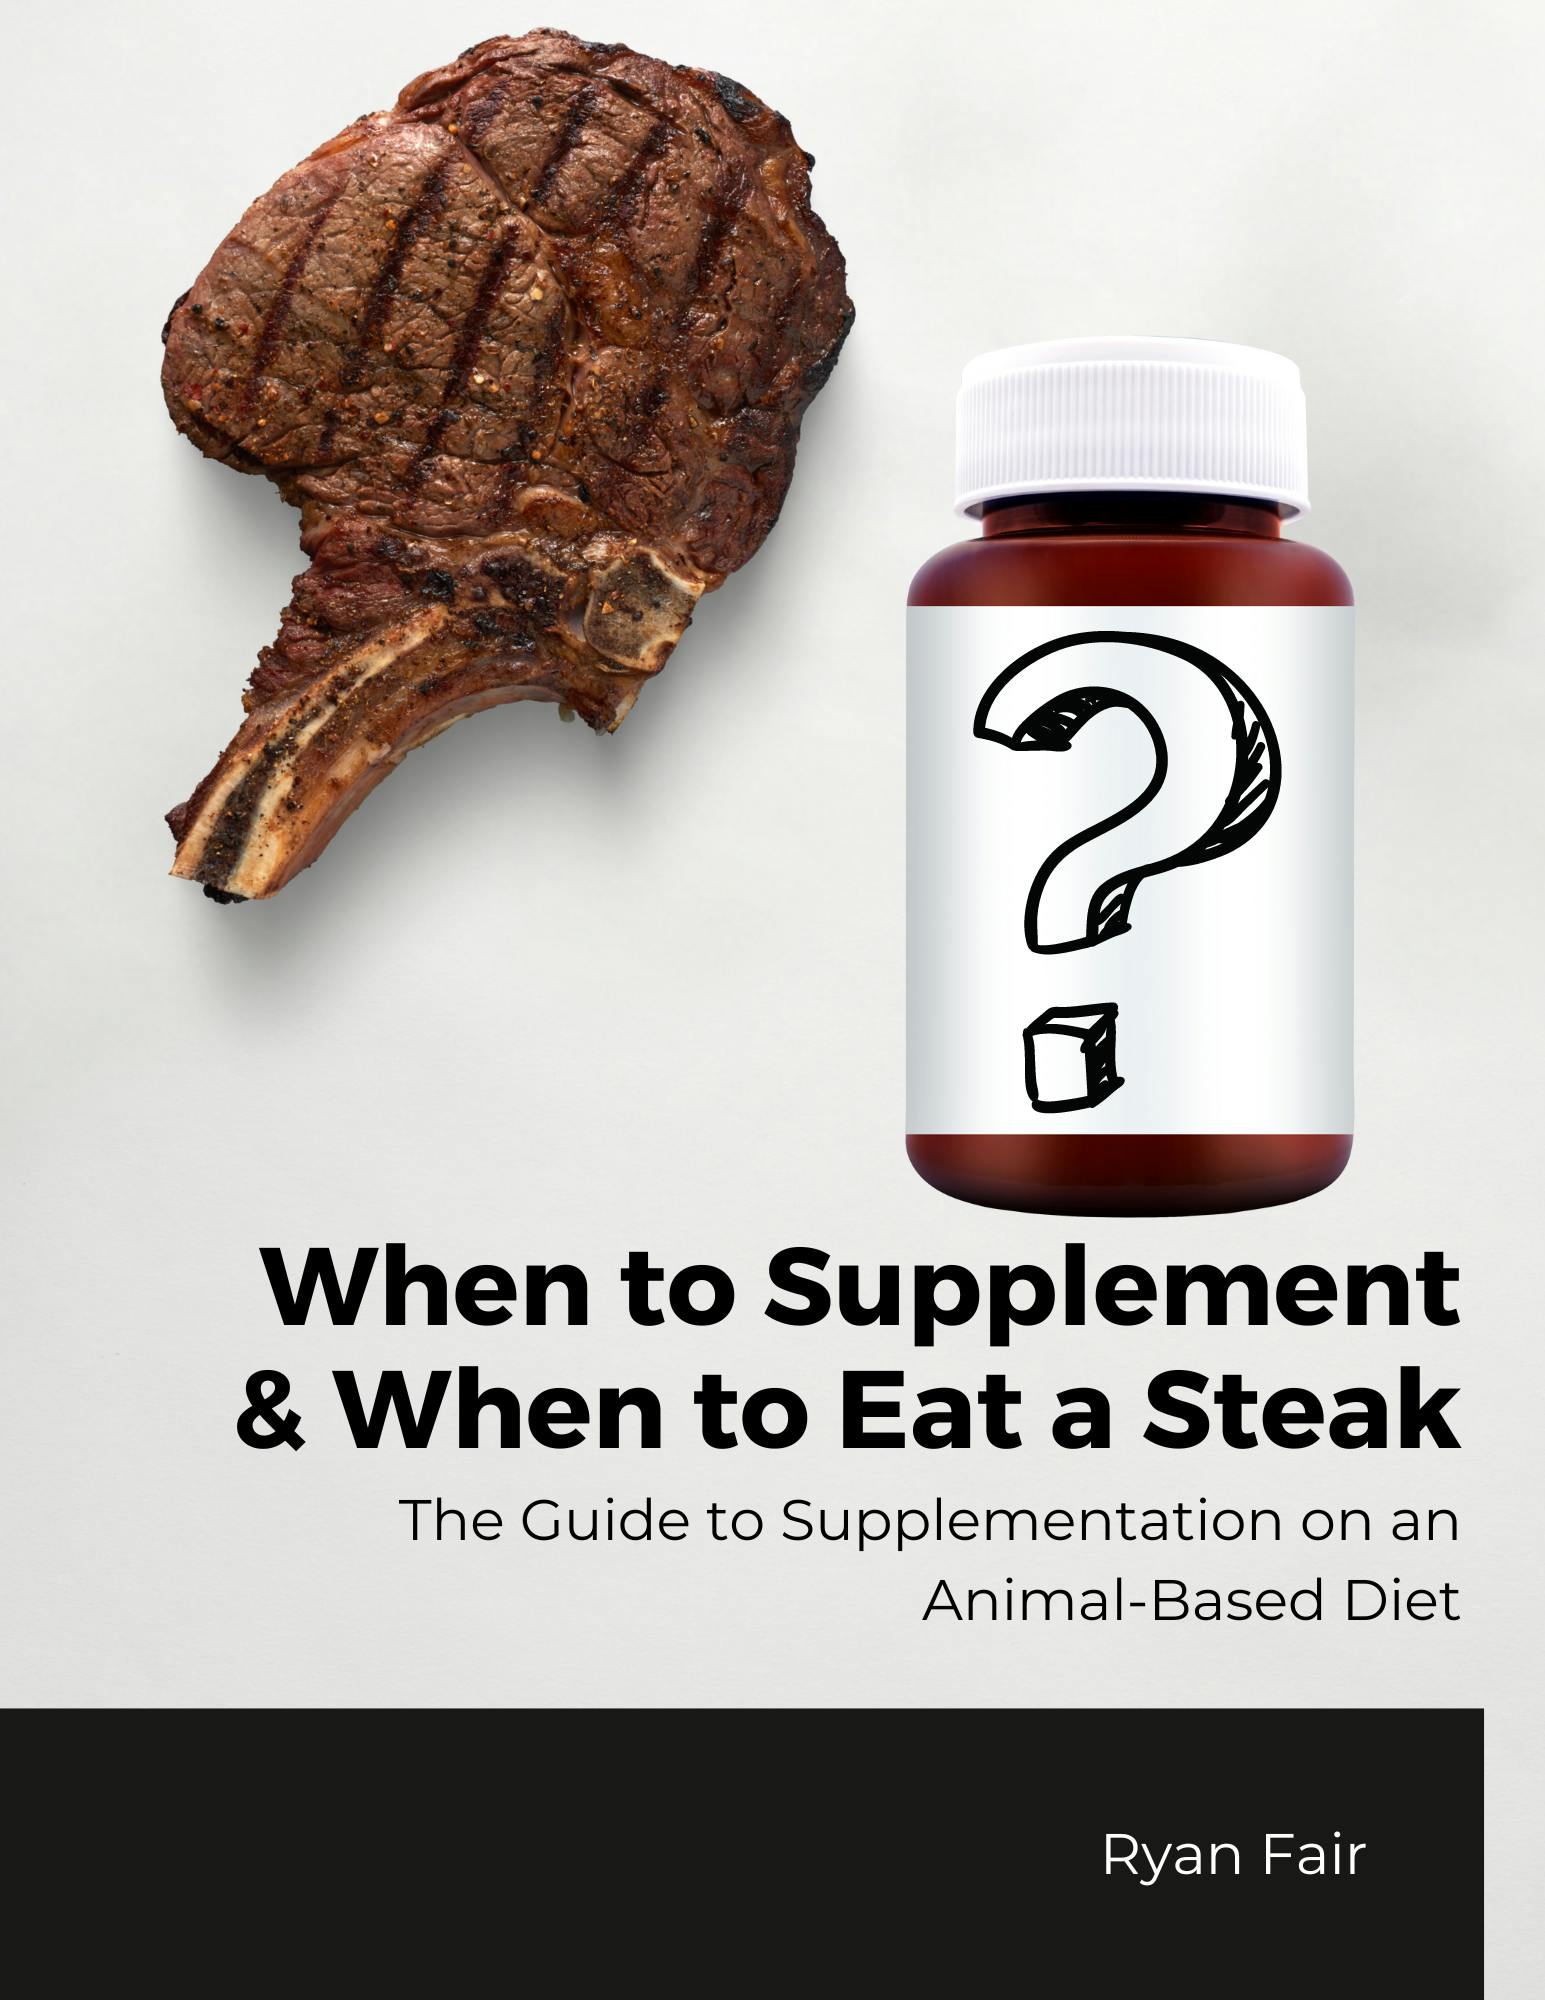 When to Supplement & When to Eat a Steak